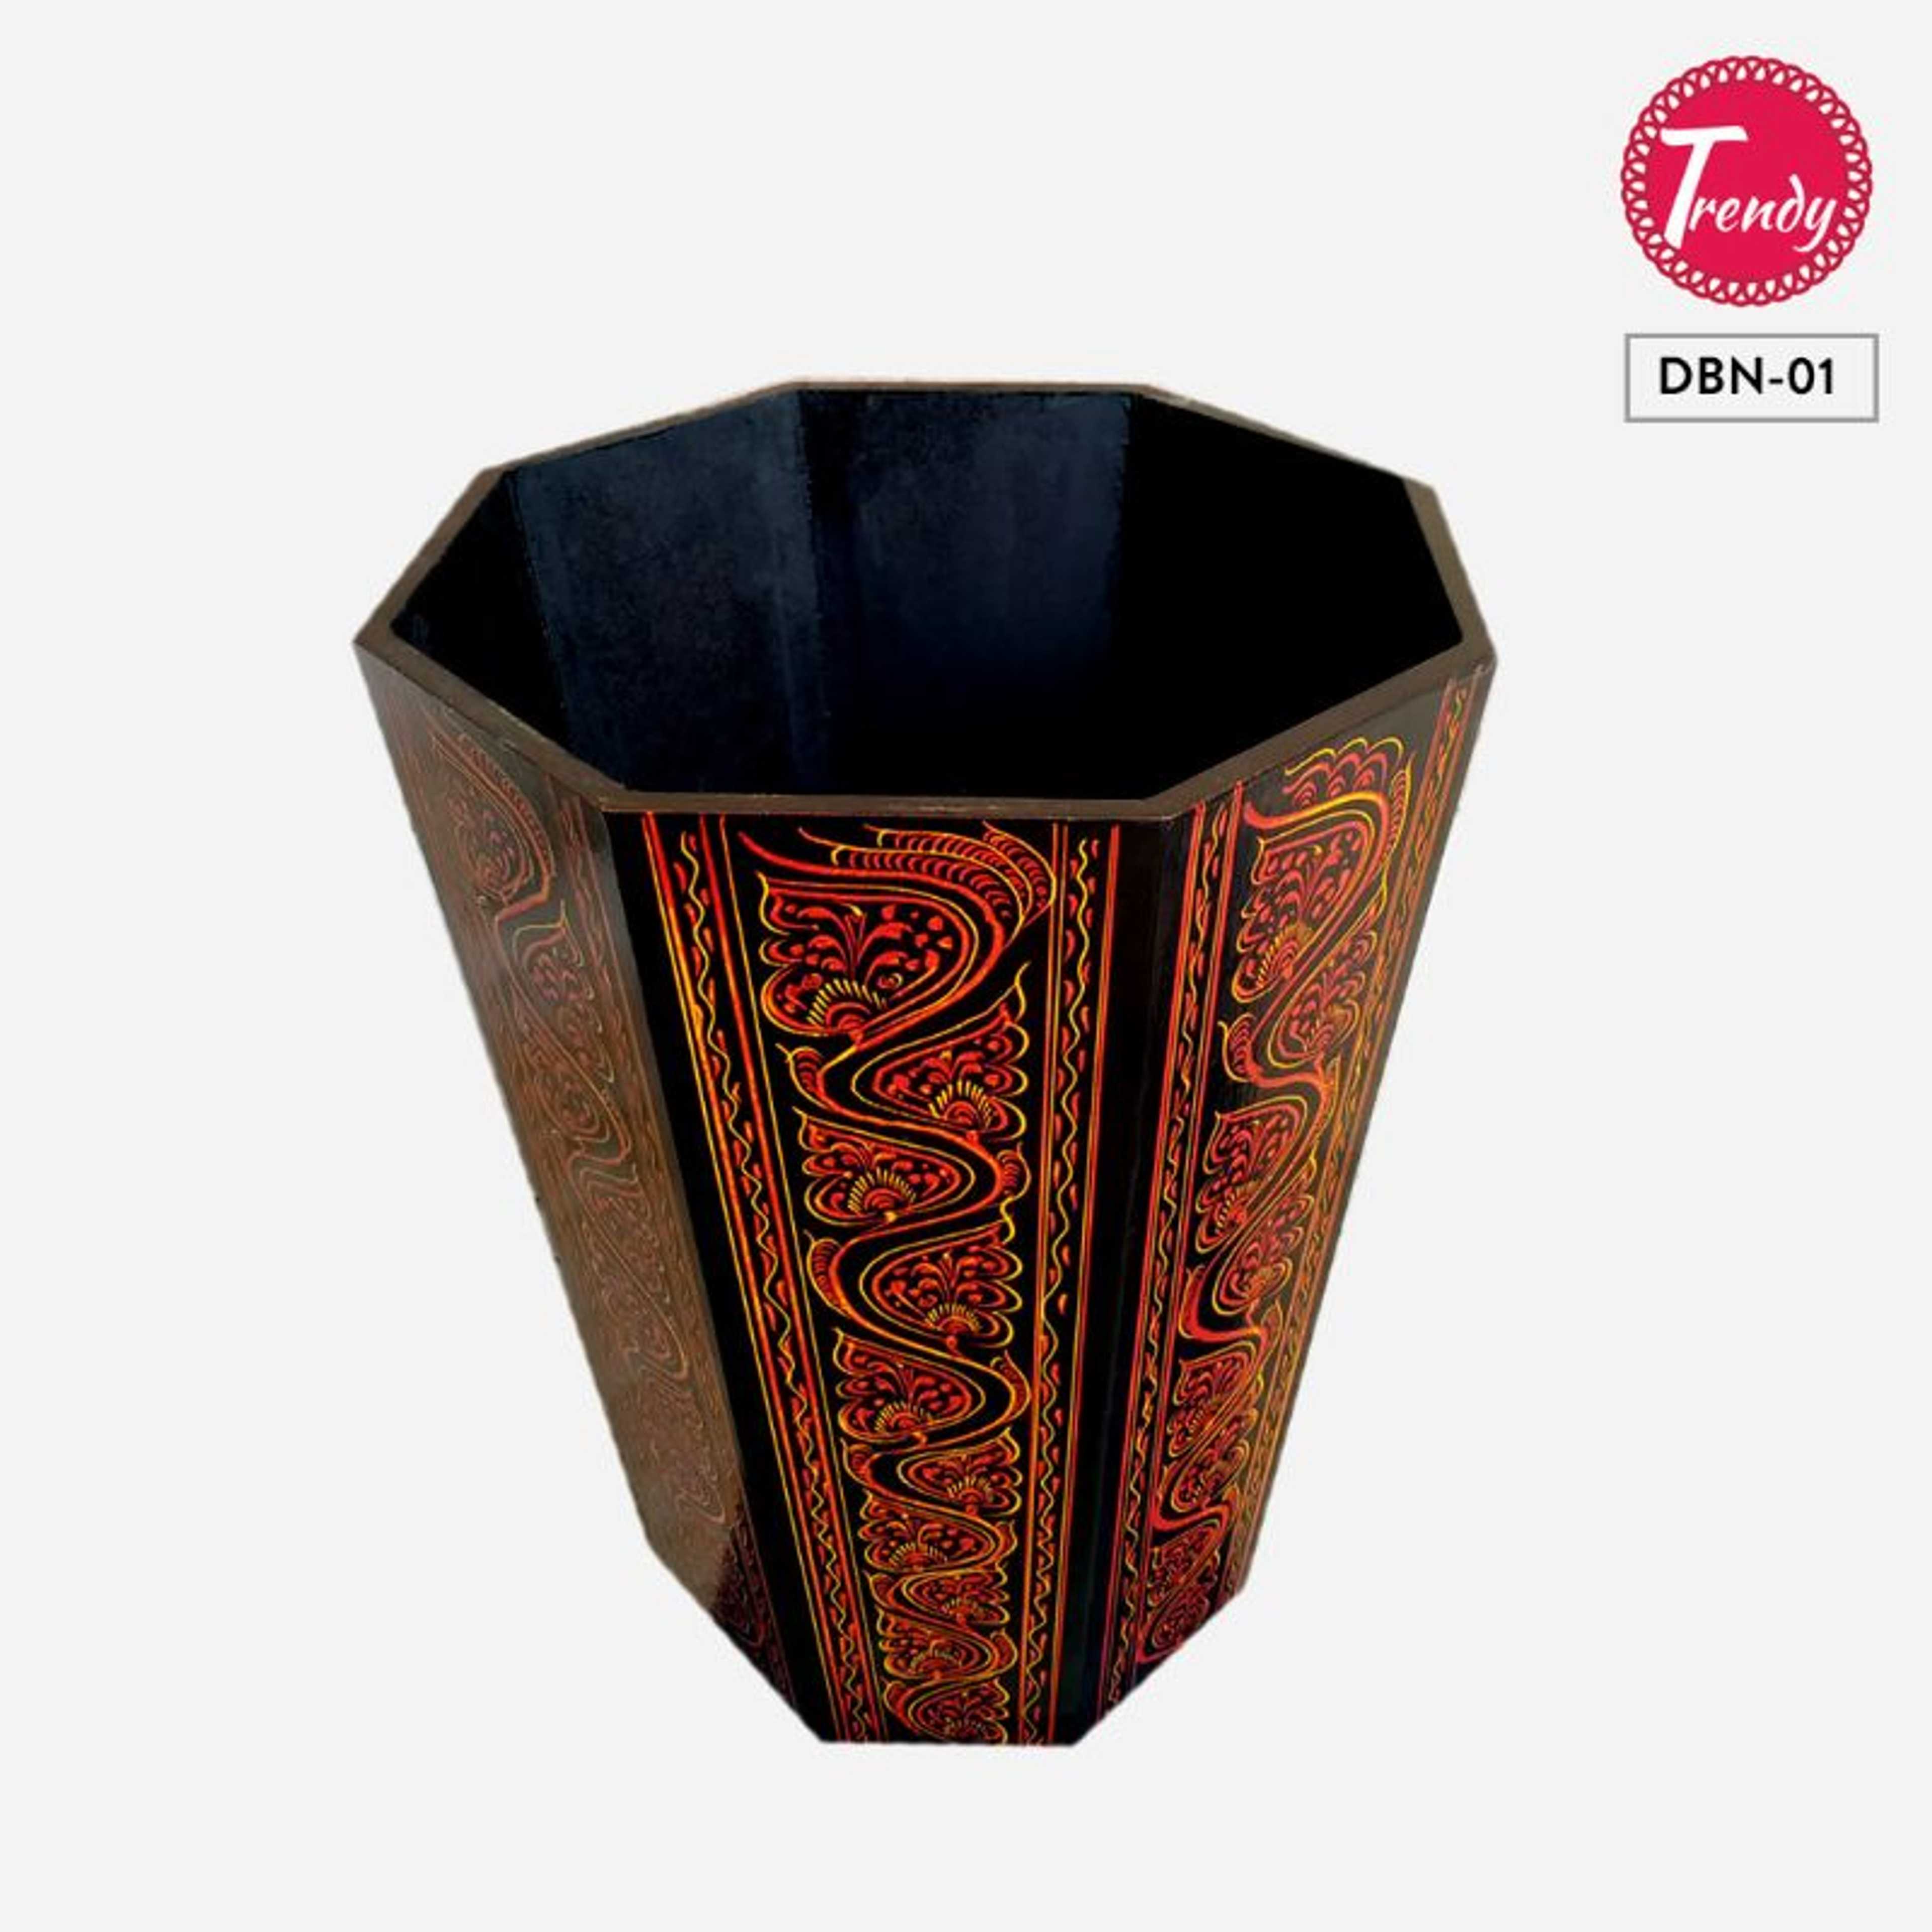 Wooden Dustbin With Man Crafted Naqashi Art DBN-01